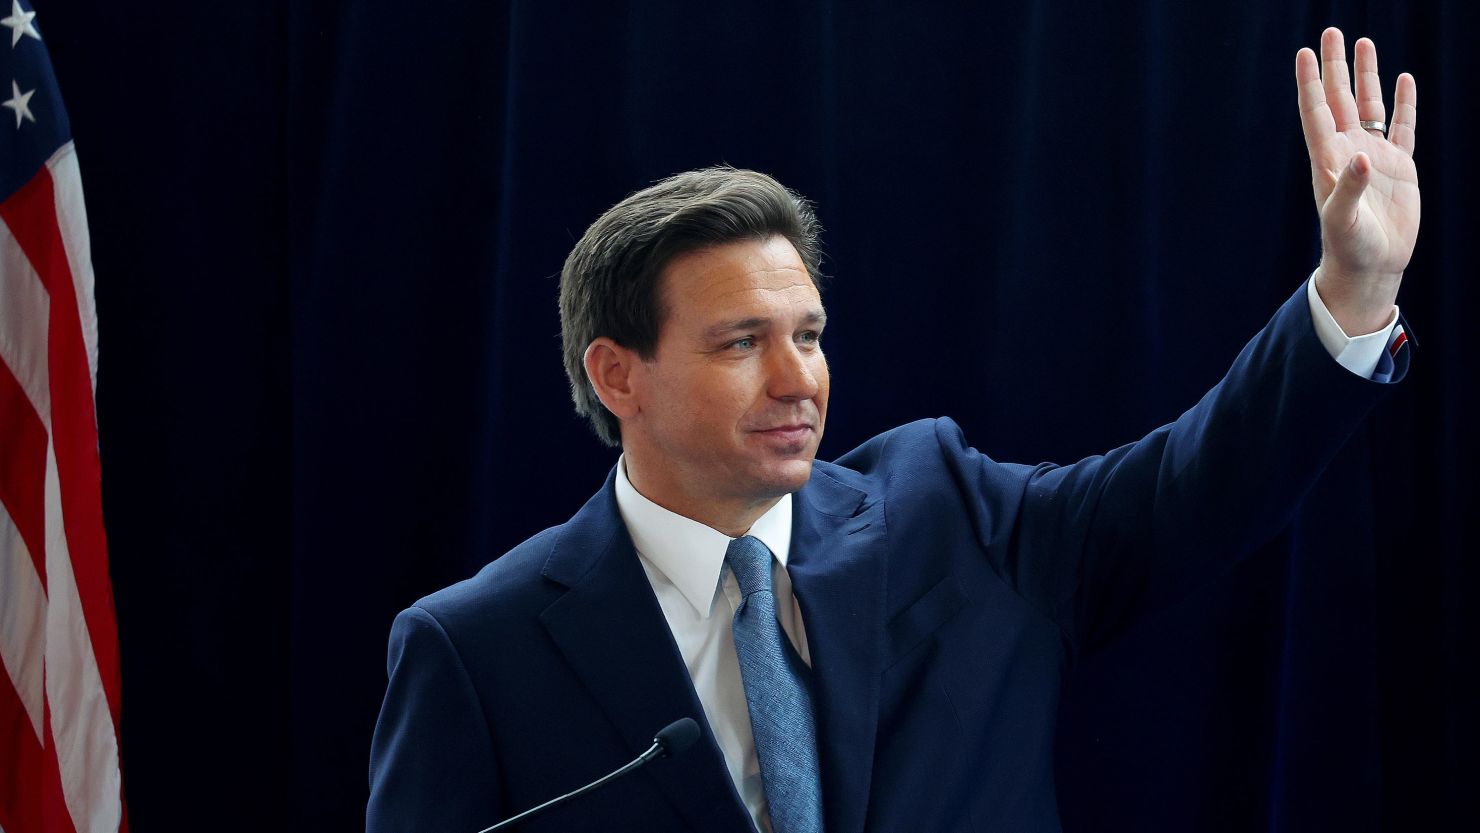 Florida Gov. Ron DeSantis waves to the crowd at the Reagan Library in Simi Valley, California, on March 5, 2023, after speaking about his new book "The Courage to Be Free."